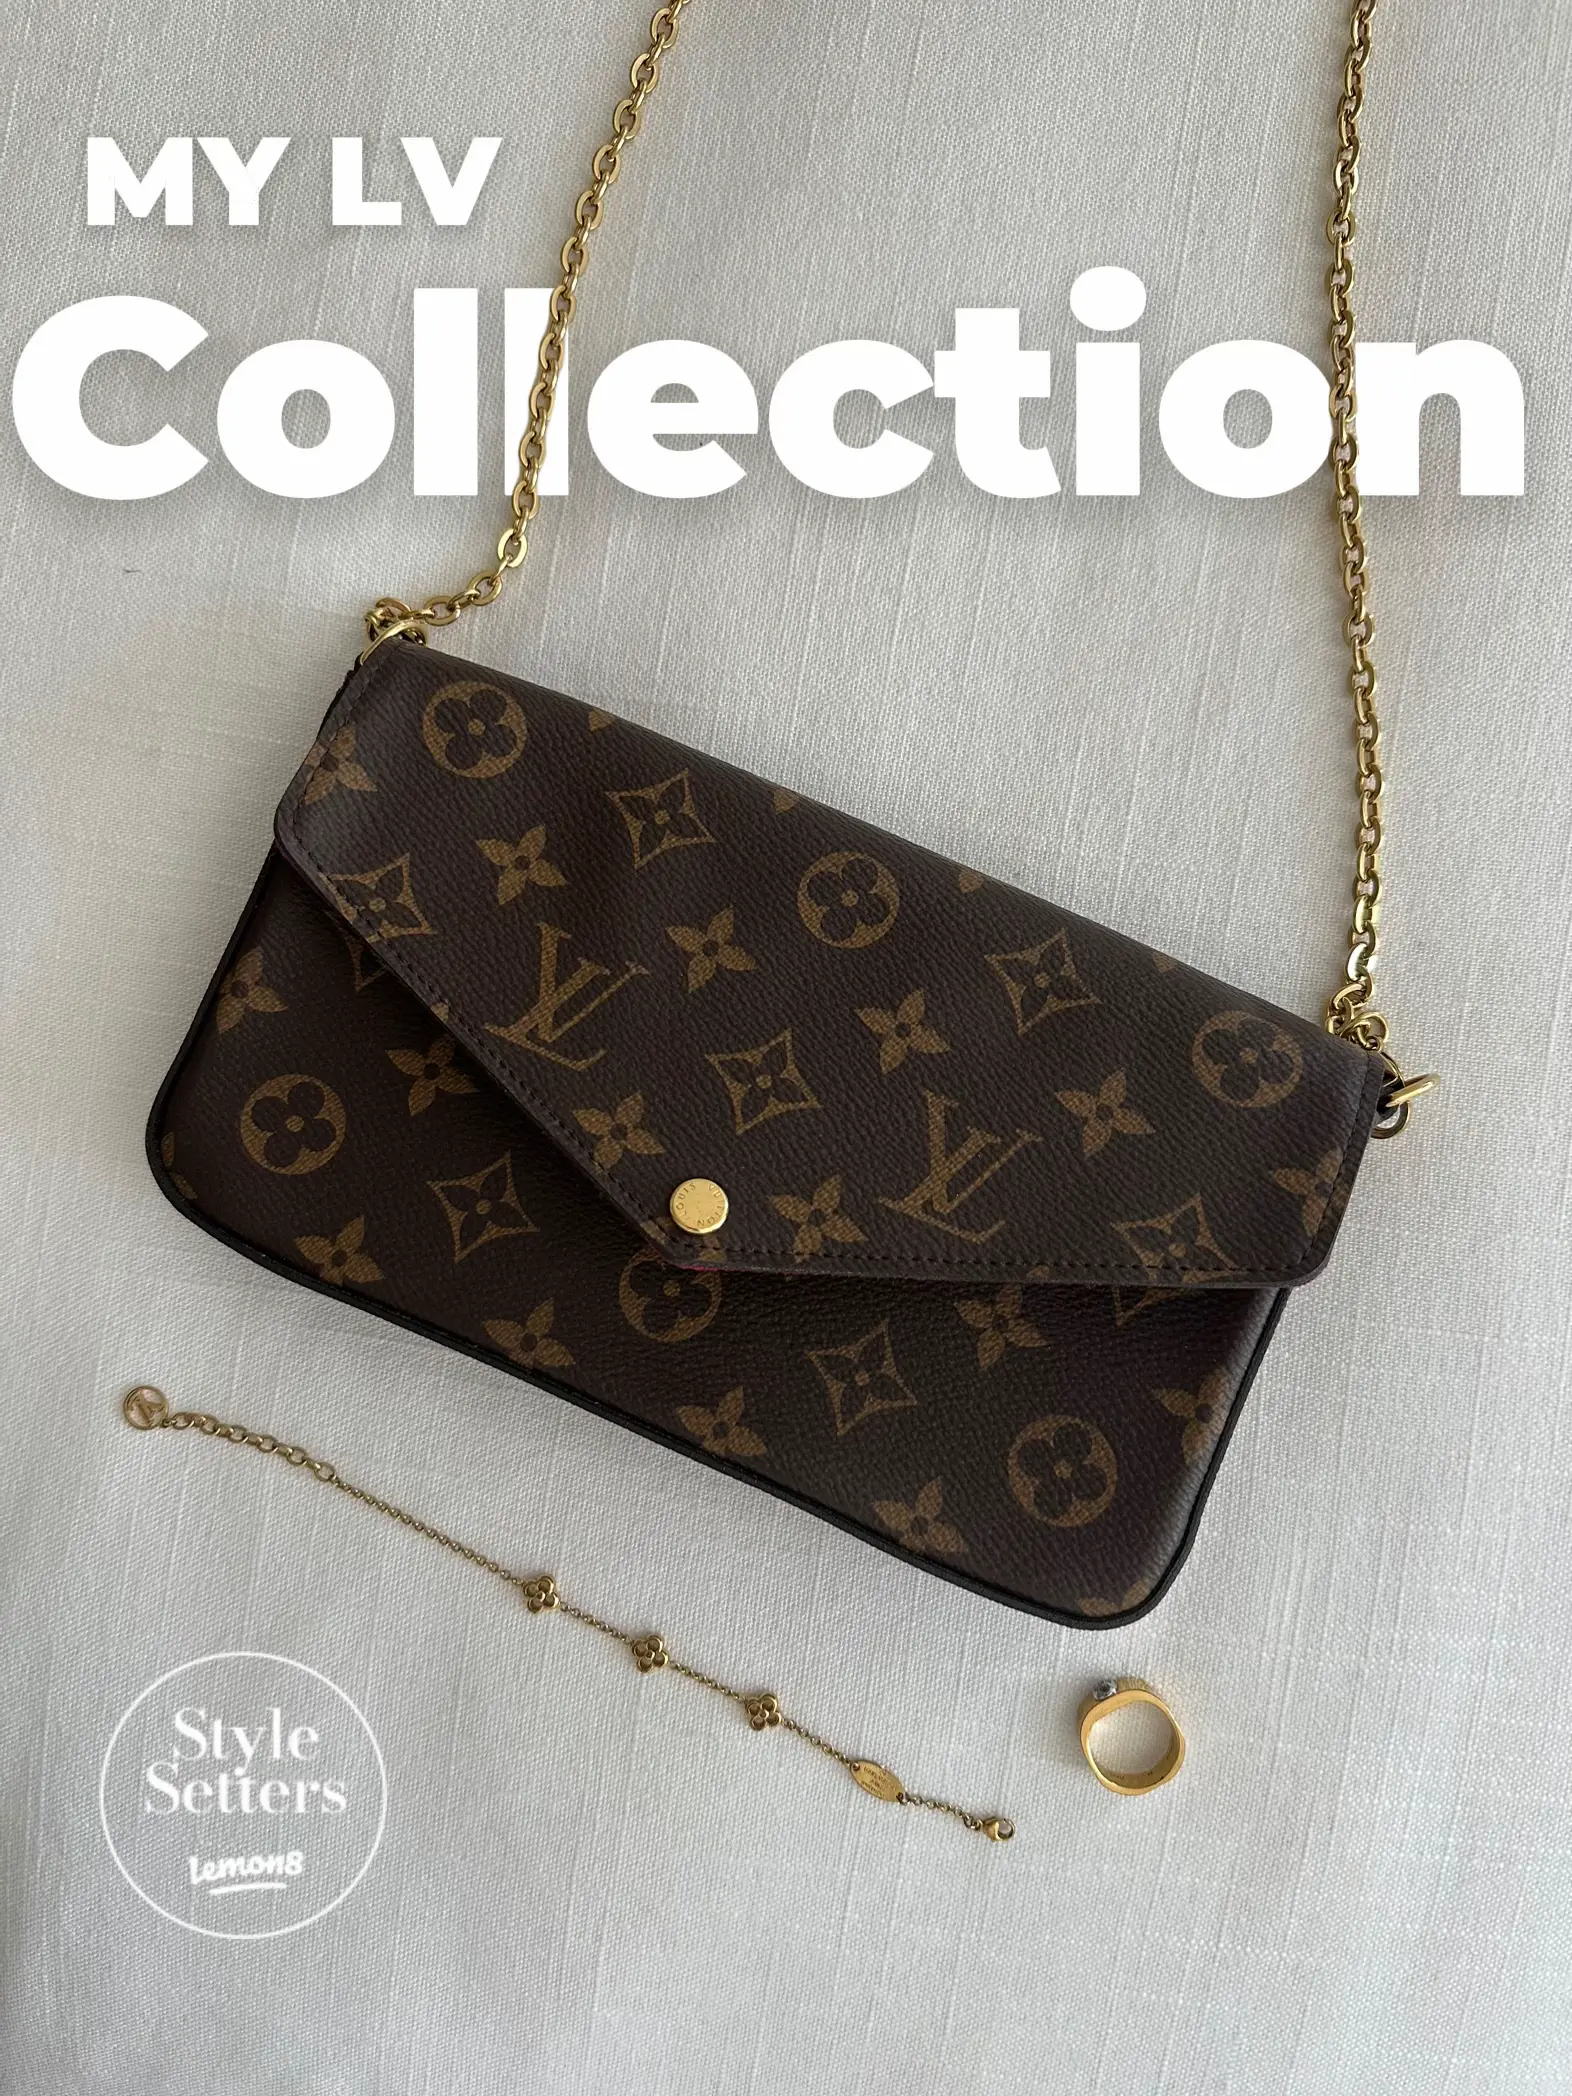 Louis Vuitton My LV World Tour Speedy Bandouliere 30. It's made to